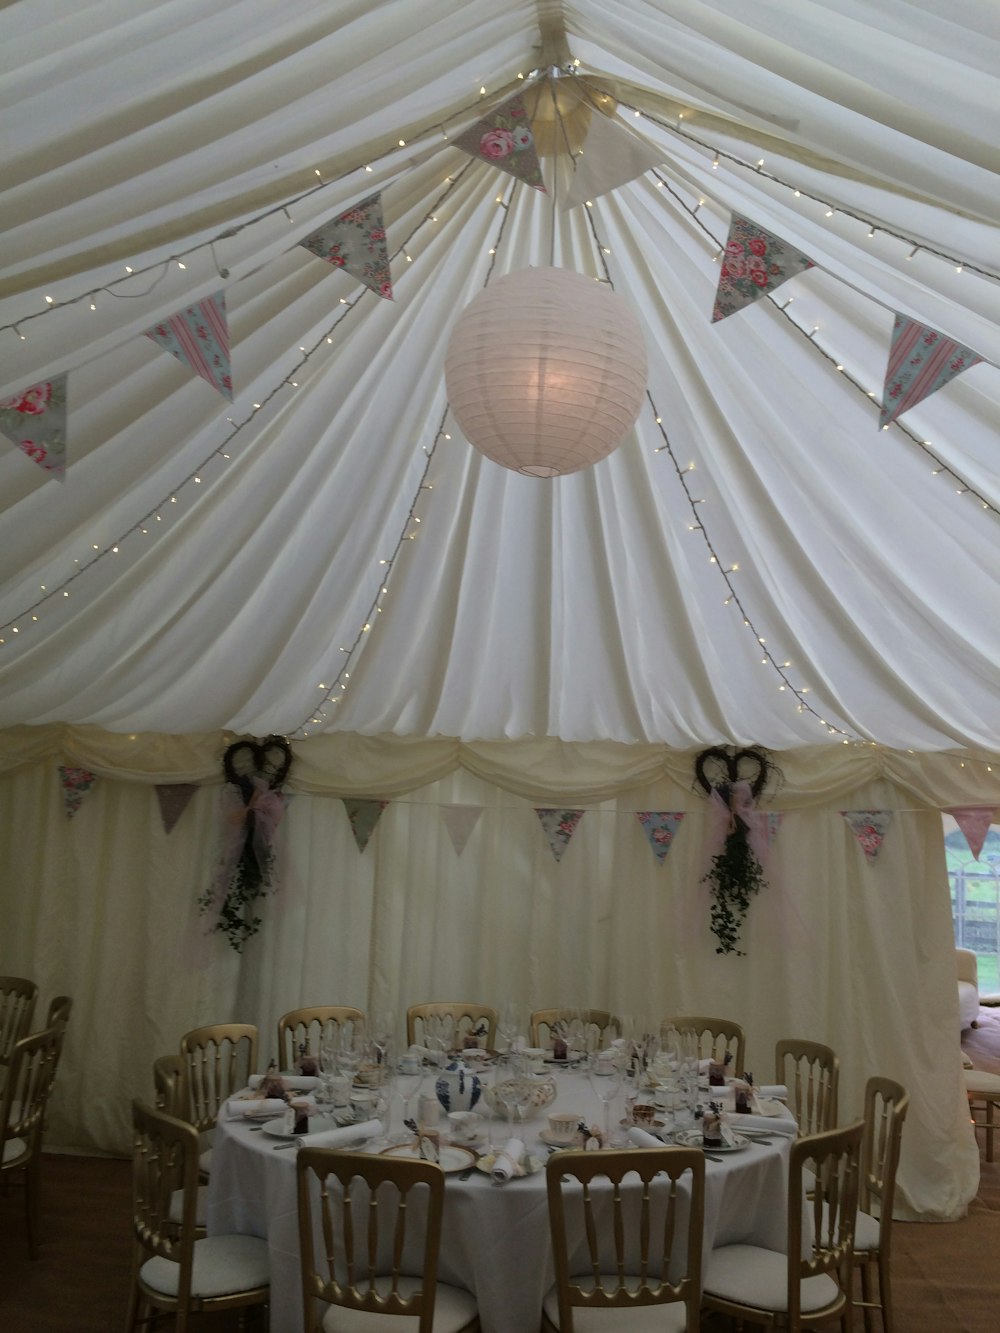 Hero image for supplier Banbury Marquee Hire Ltd